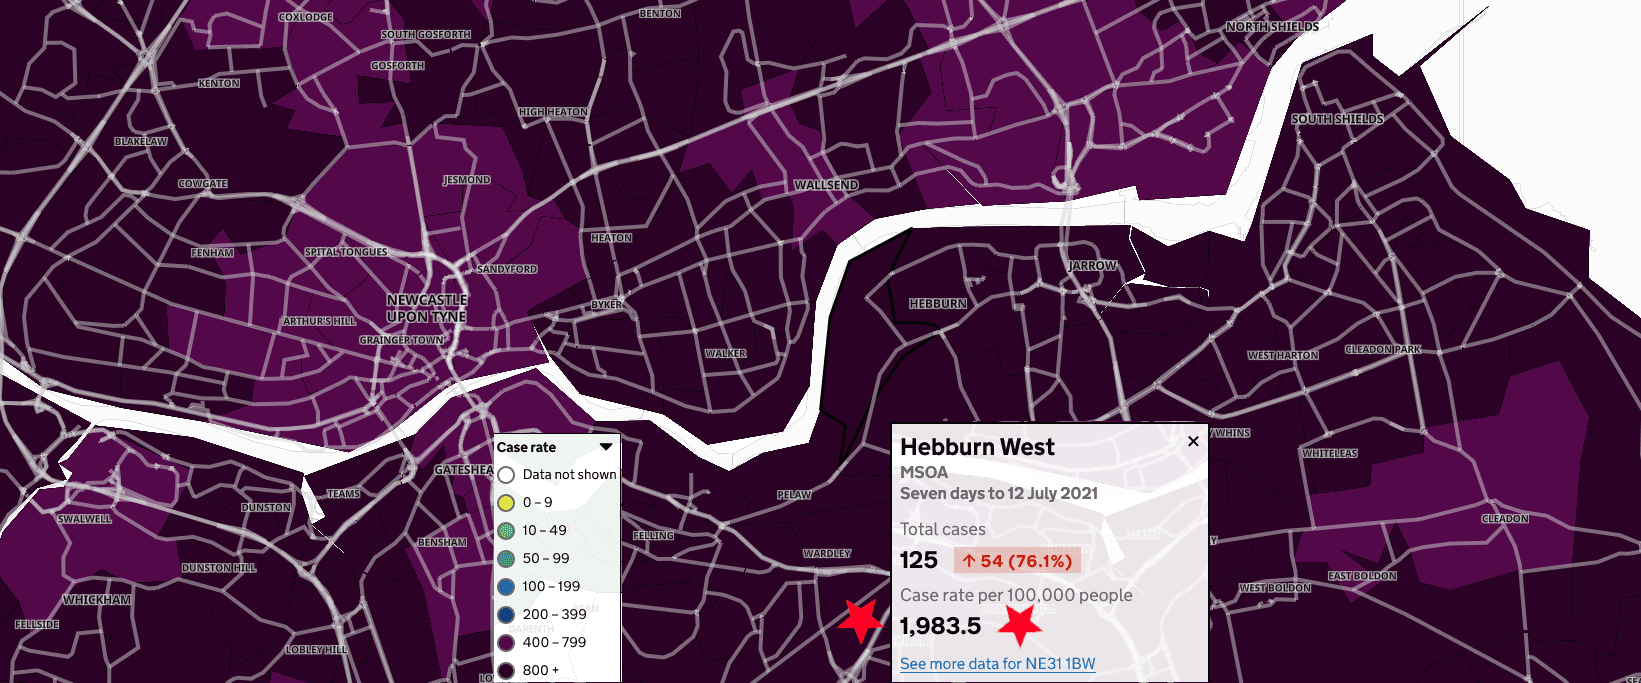 Hebburn West now nearly 2,000 cases per 100,000 people